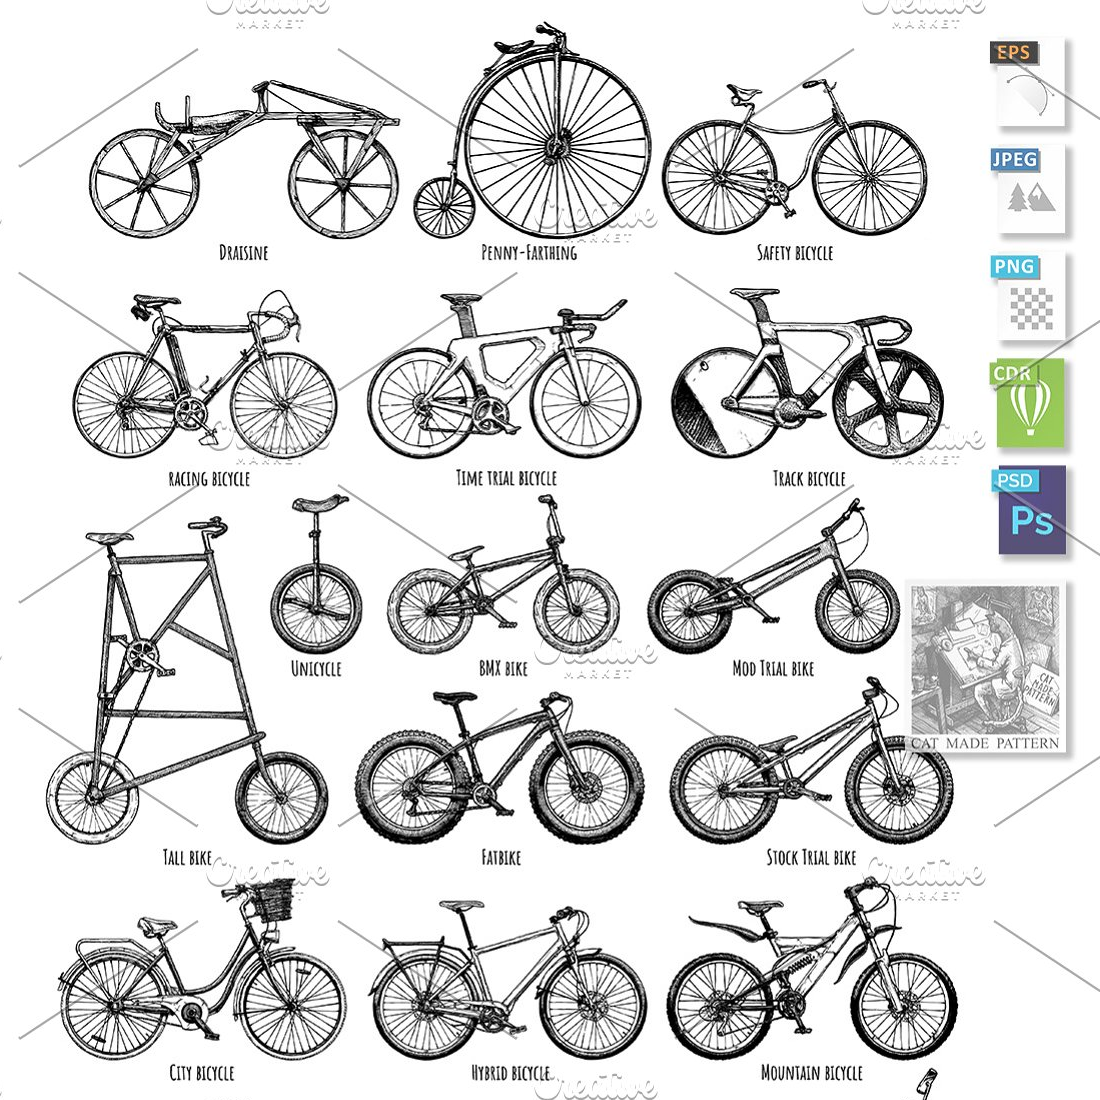 Images preview types of bikes.